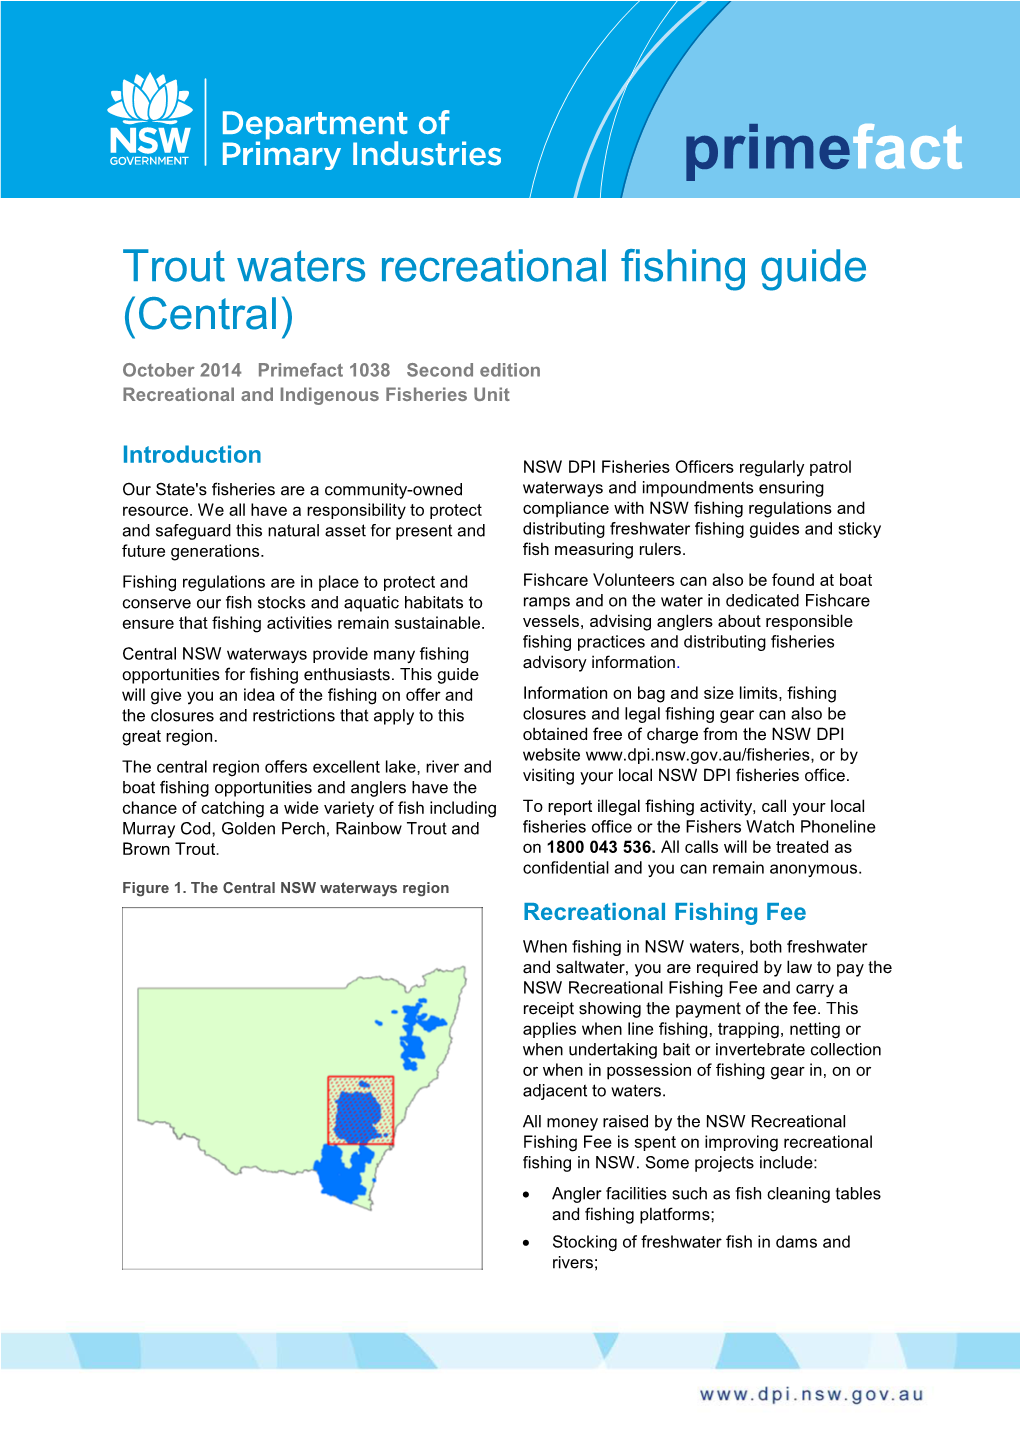 Trout Waters Recreational Fishing Guide (Central)